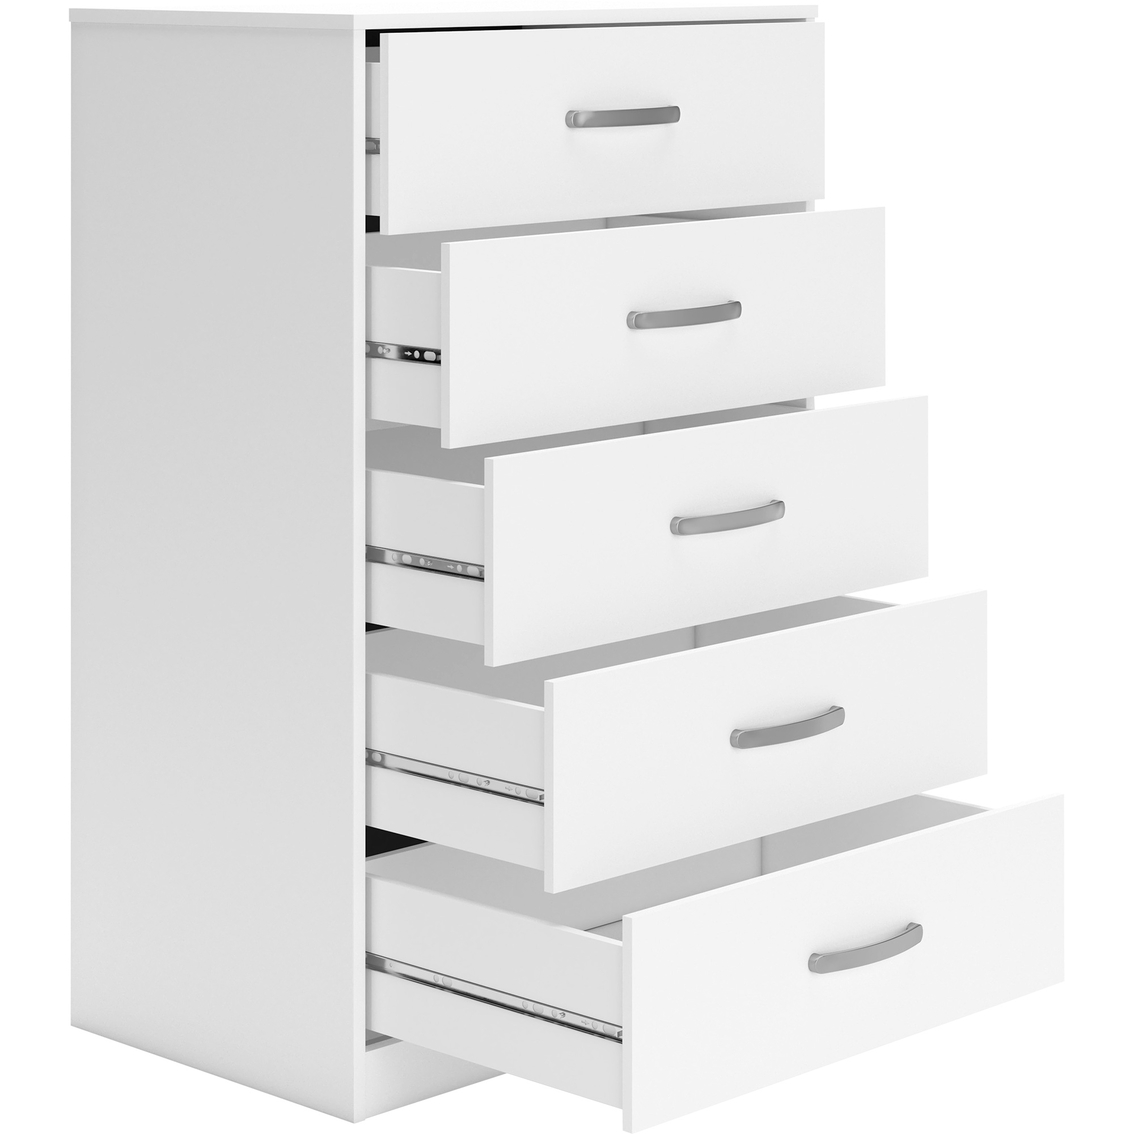 Signature Design by Ashley Flannia Chest of Drawers - Image 5 of 5